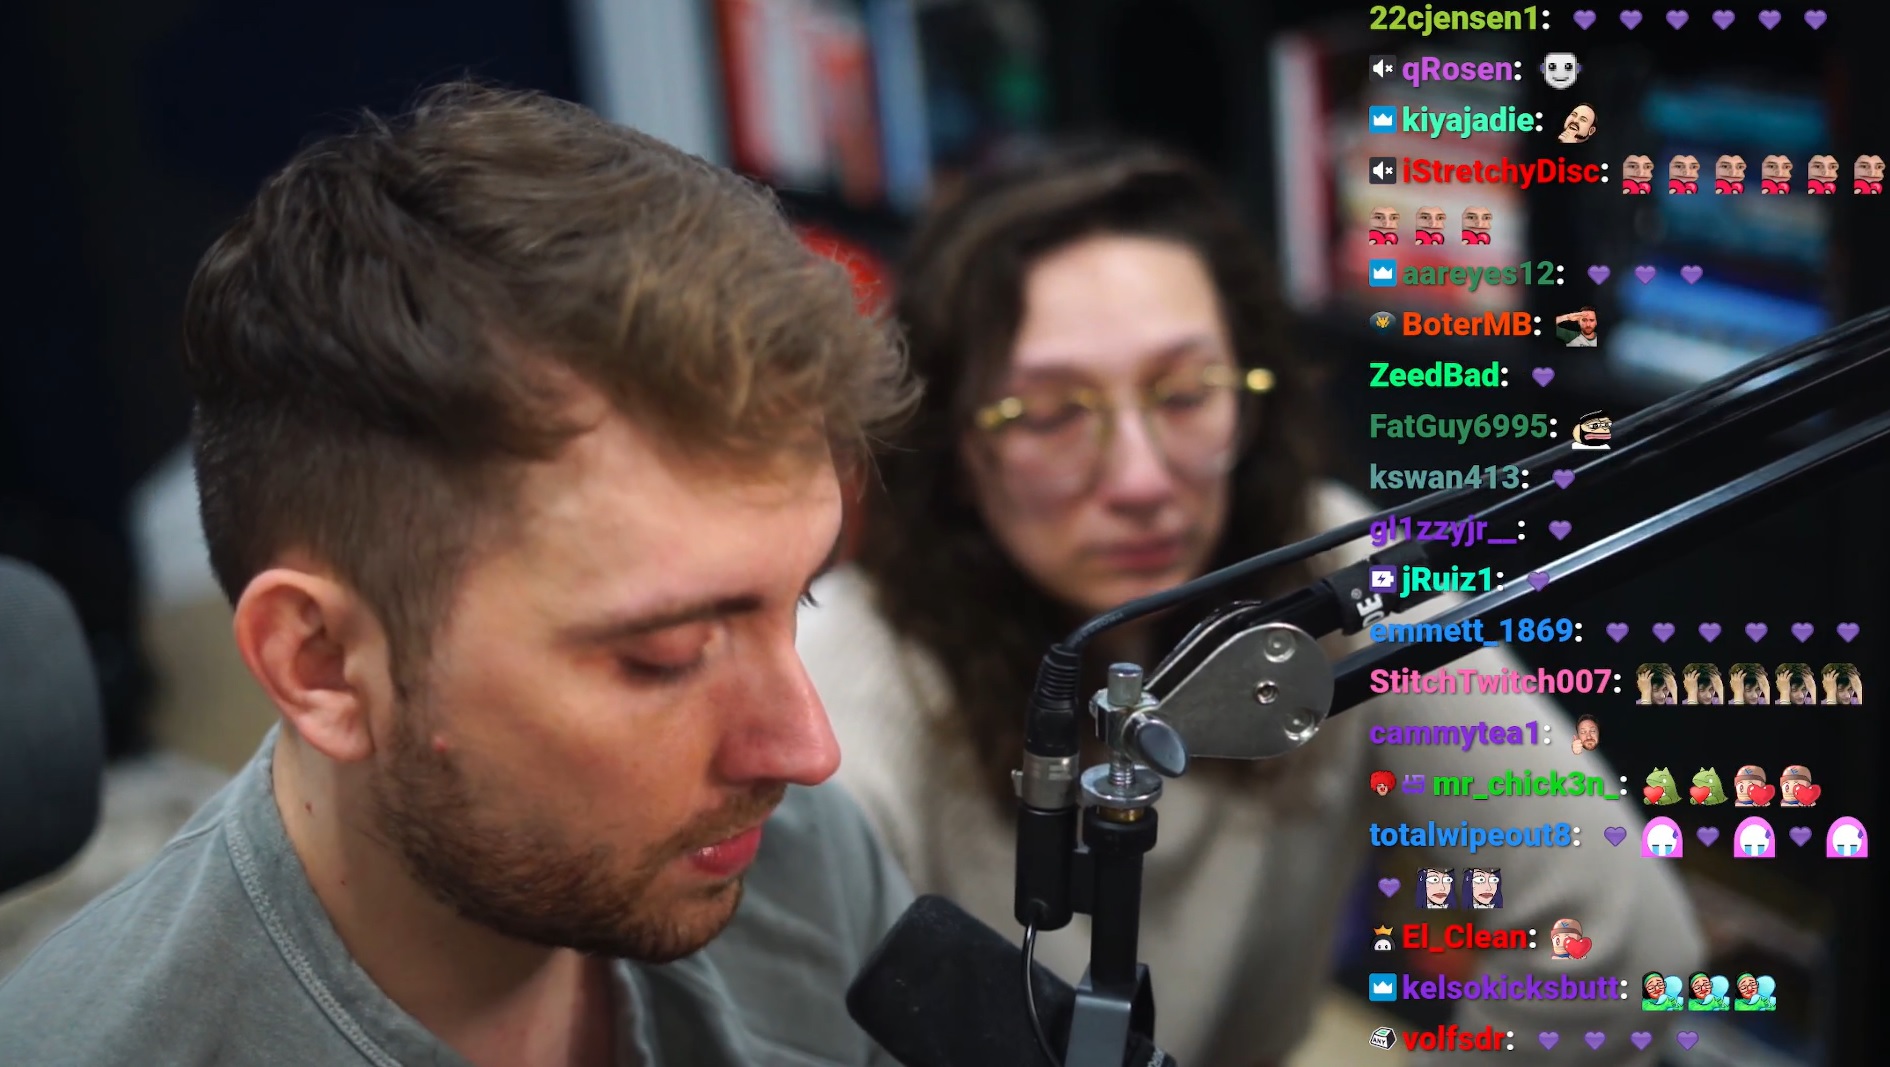 JustaMinx Has Fight With Sister on Twitch After Streamer Awards Drama